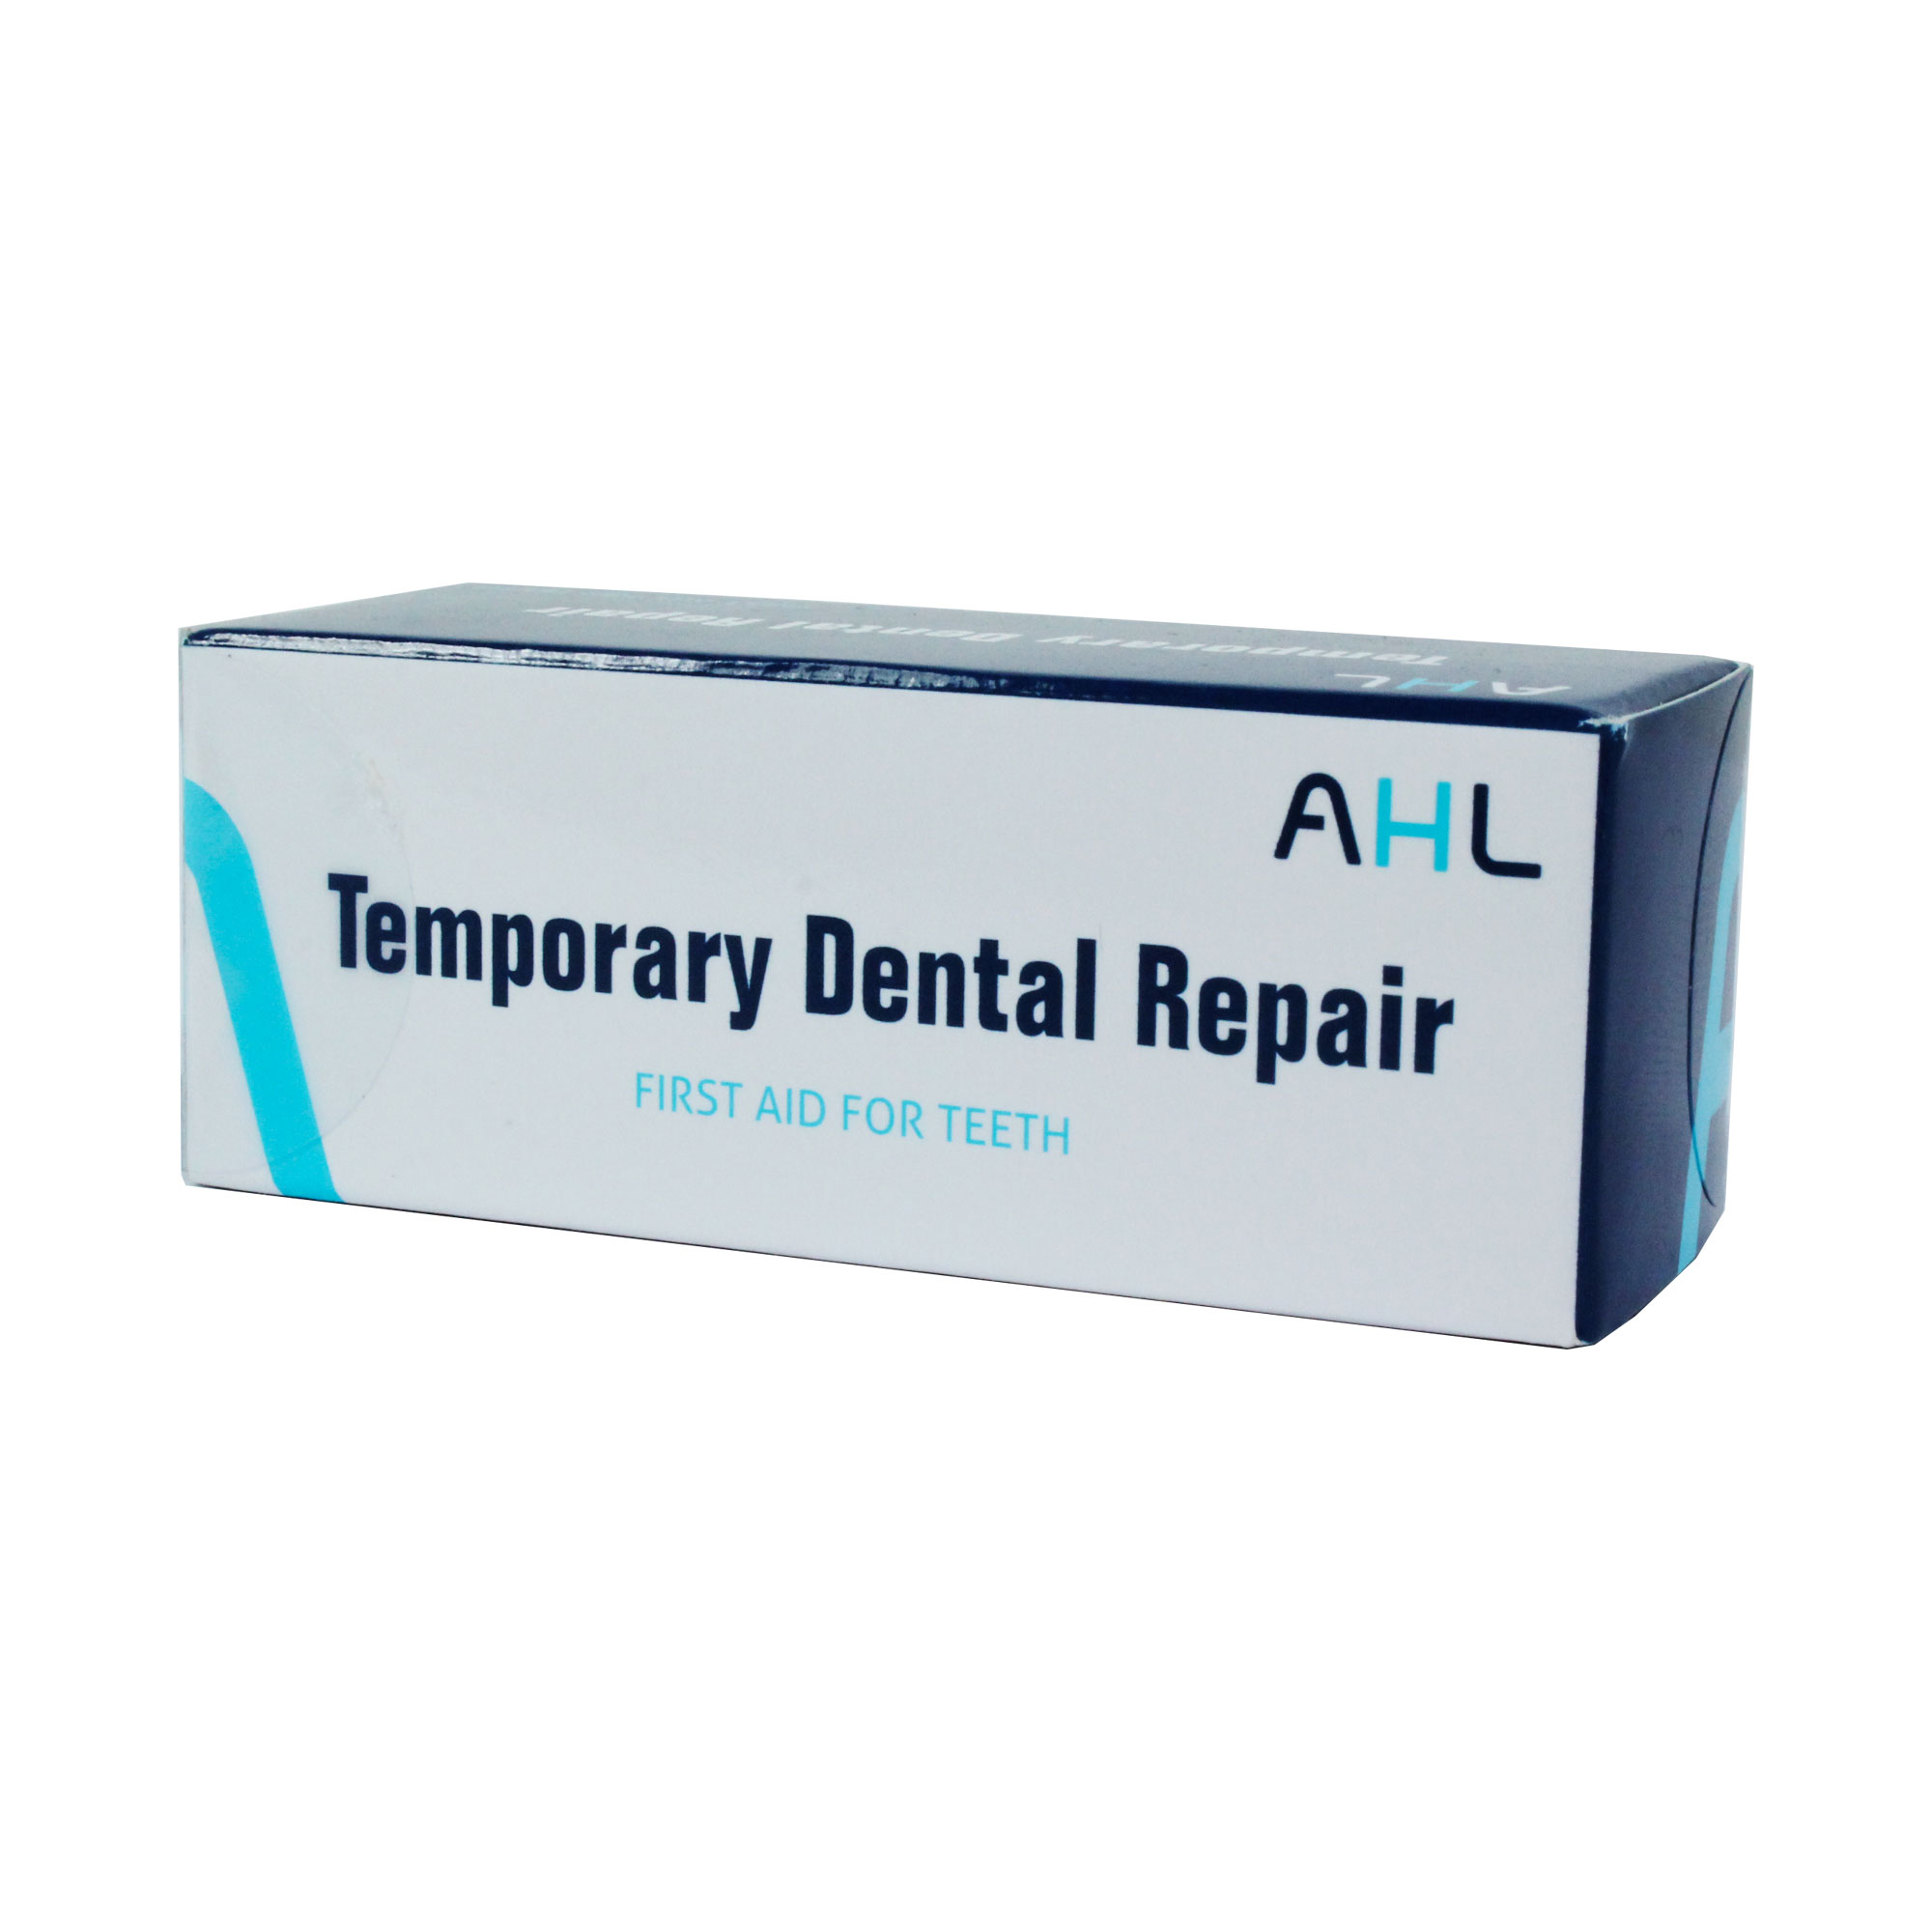 Over The Counter Temporary Dental Glue Cement for Crowns Bridges - DIY